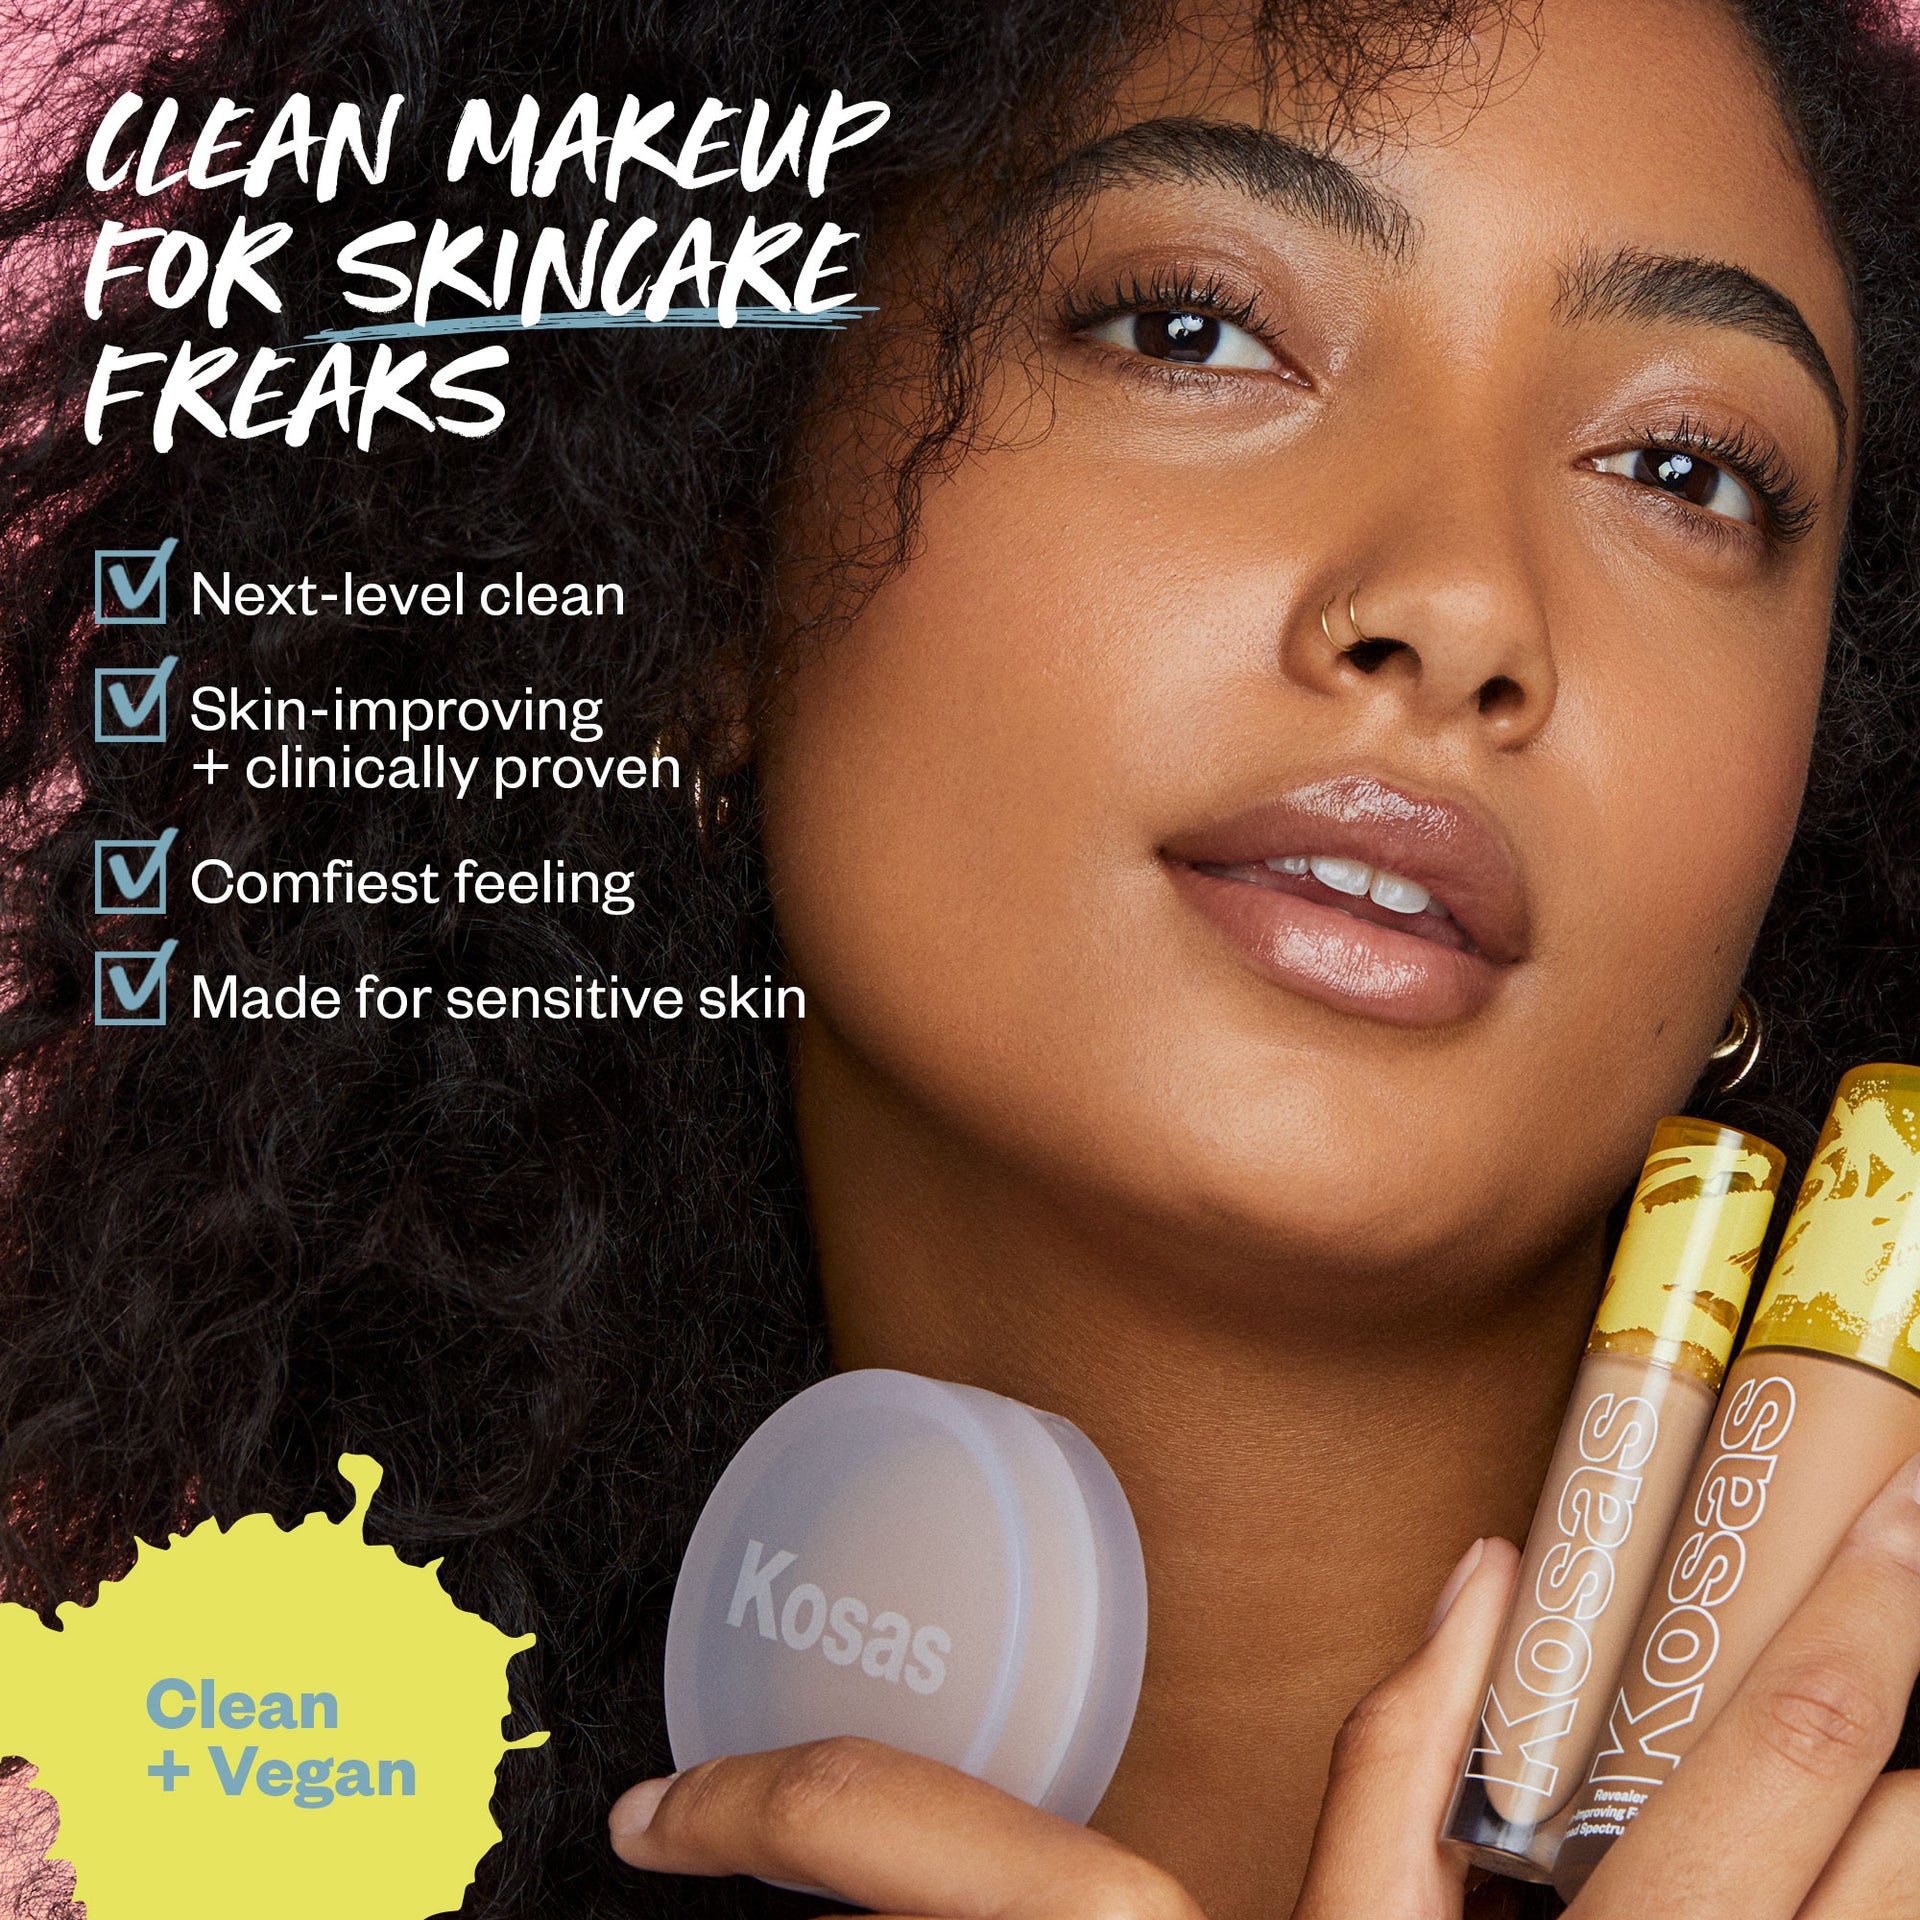 Clean Makeup for Skincare Freaks